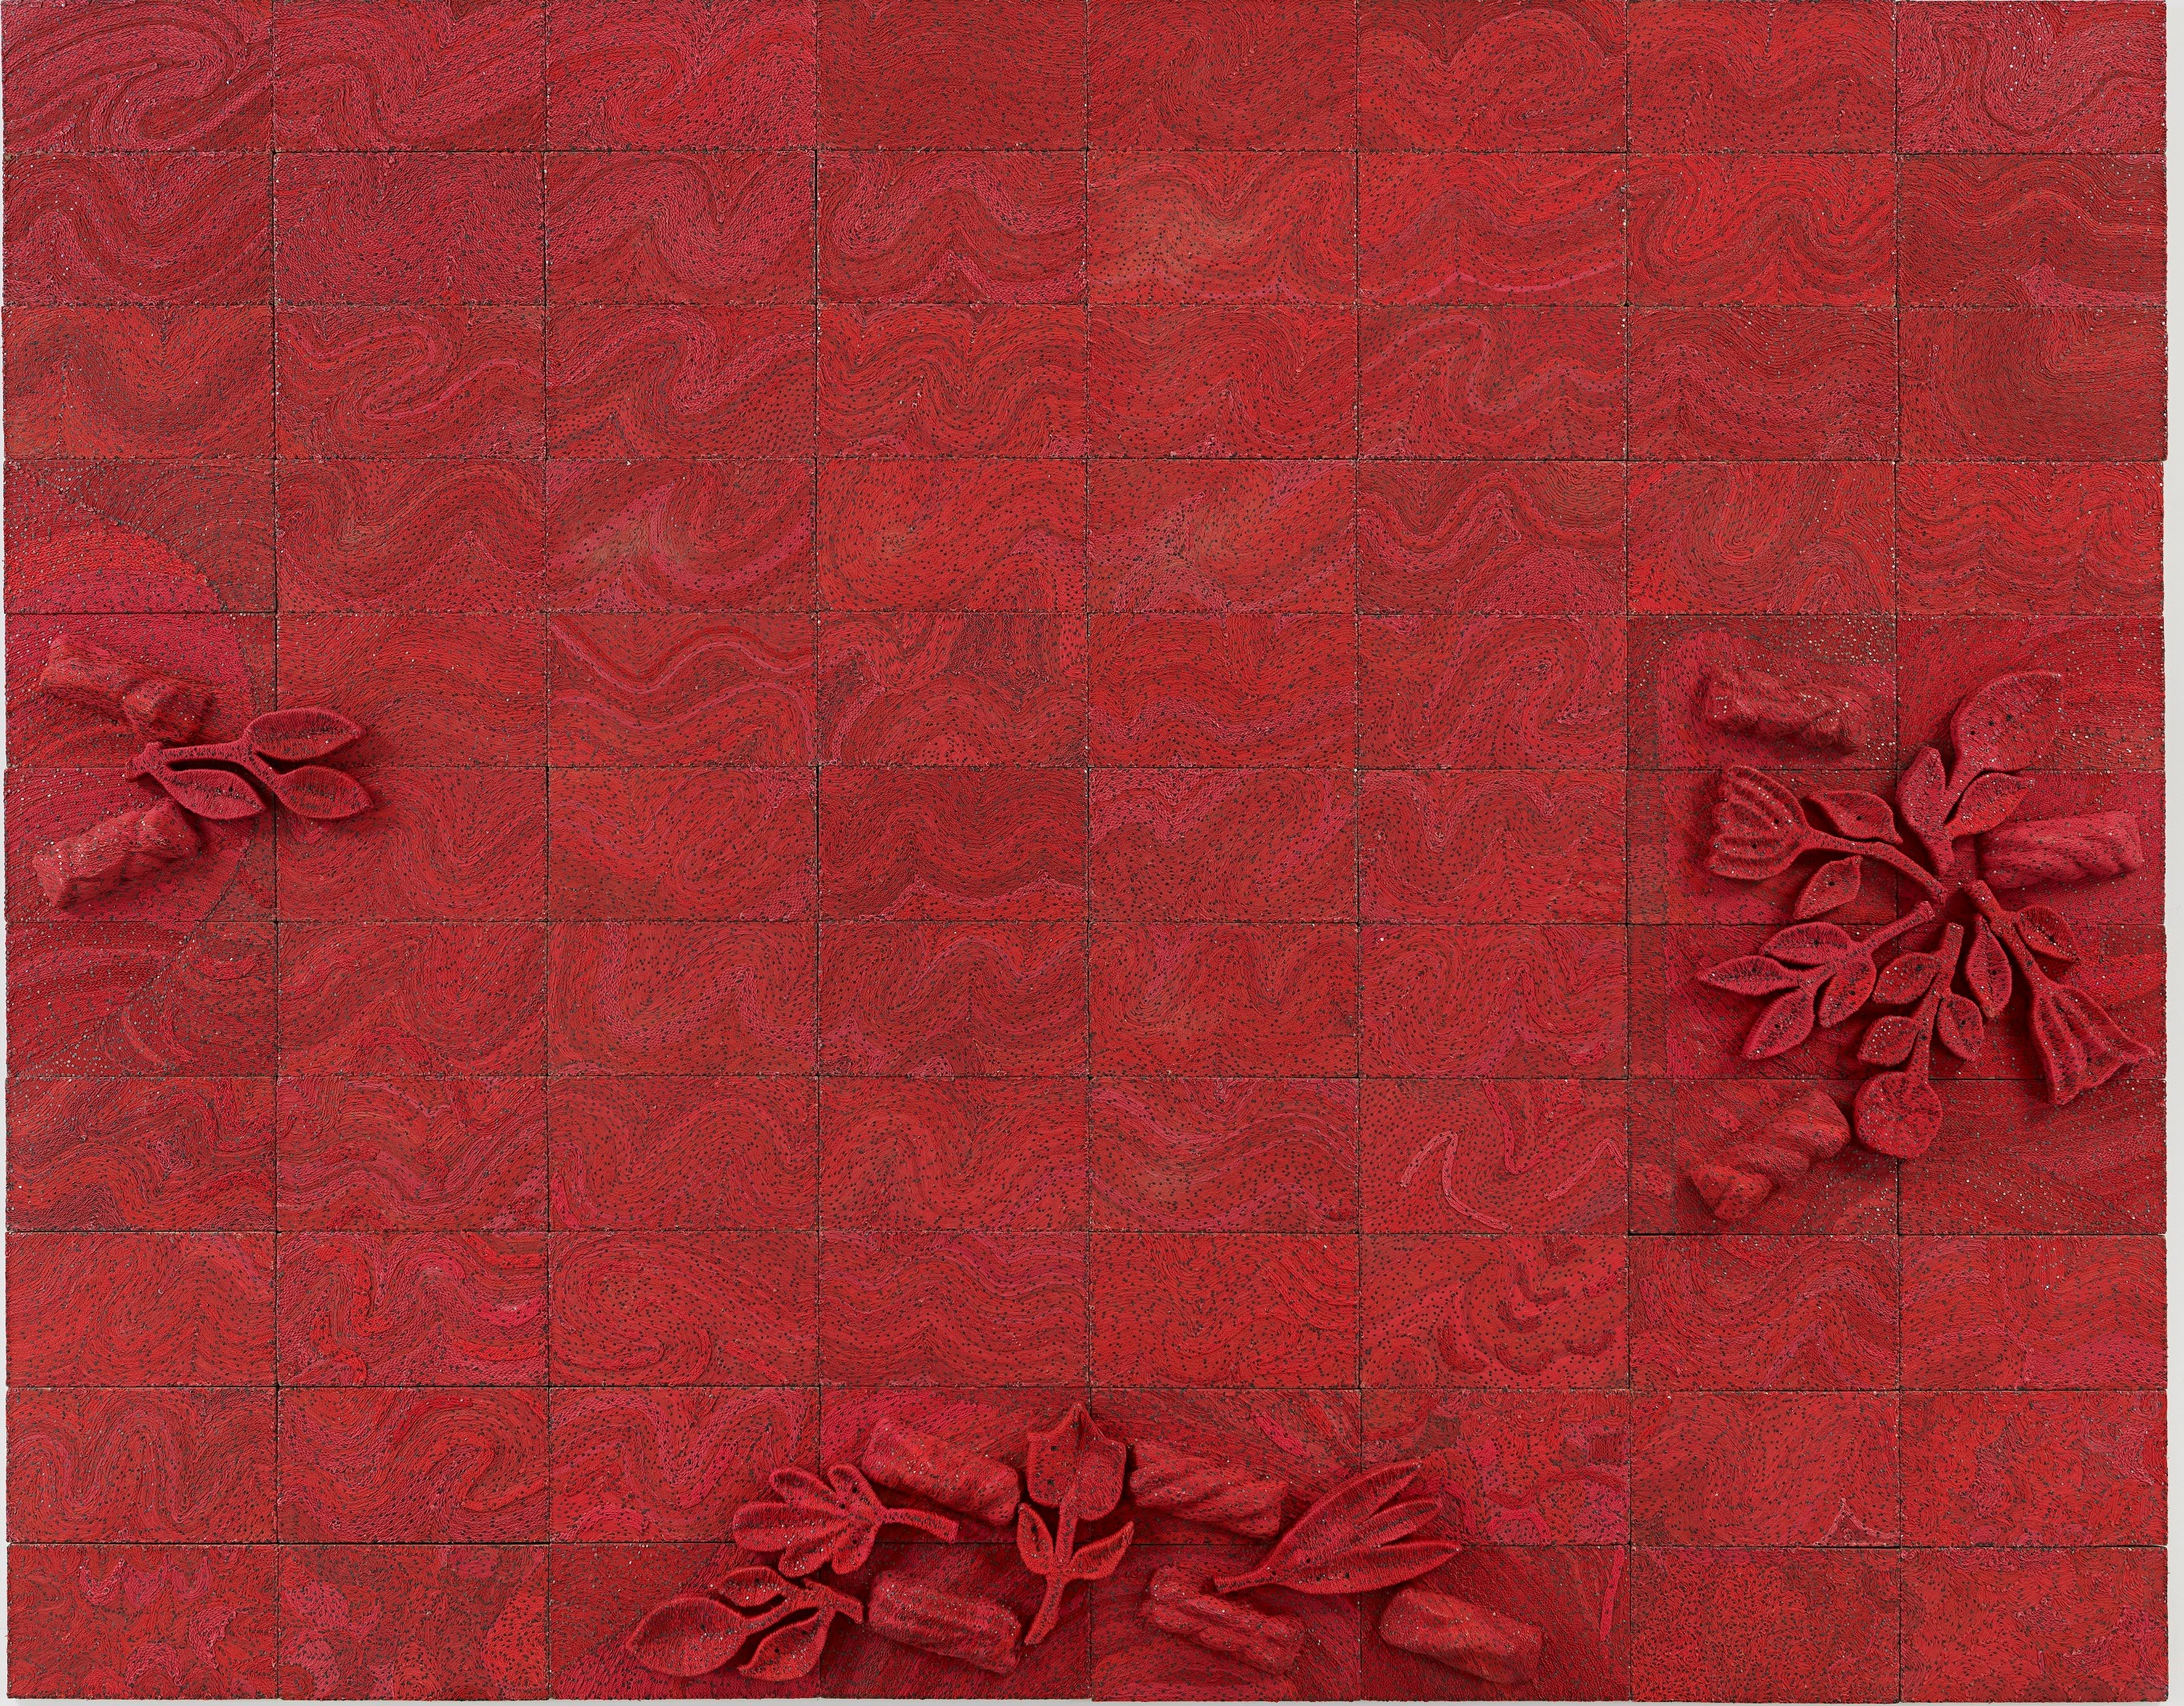 A coloured photograph of Elias Sime’s work called Tightrope: It is Green 8. A bright earthy shade of red wall-based work that is made from electrical wires on a panel, with floral reliefs on the bottom center, left and right end of the panel.